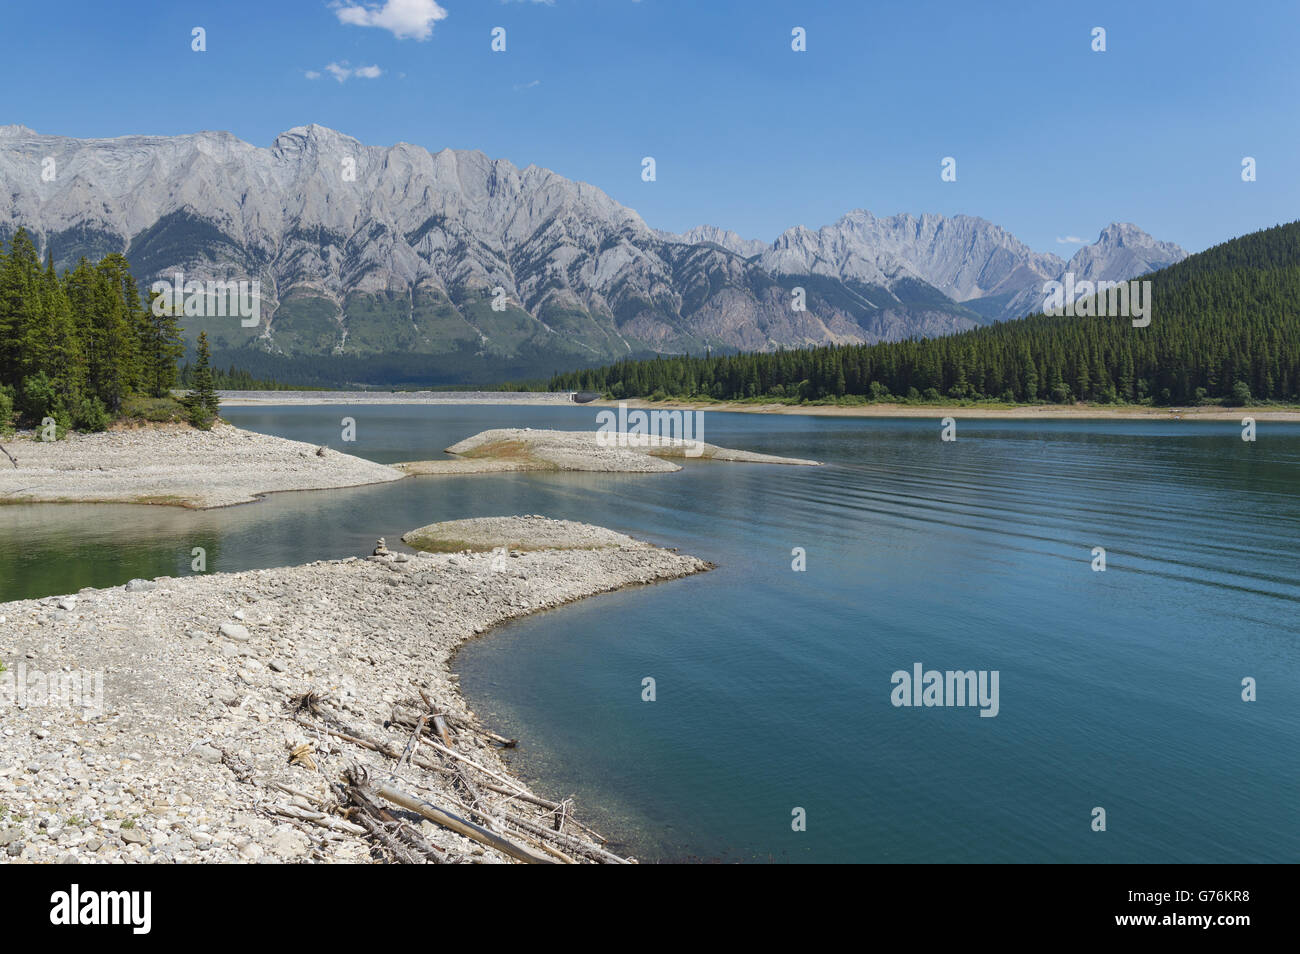 Kananaskis Lake on a summer day with mountains in the Rocky Mountains Alberta Canada Stock Photo